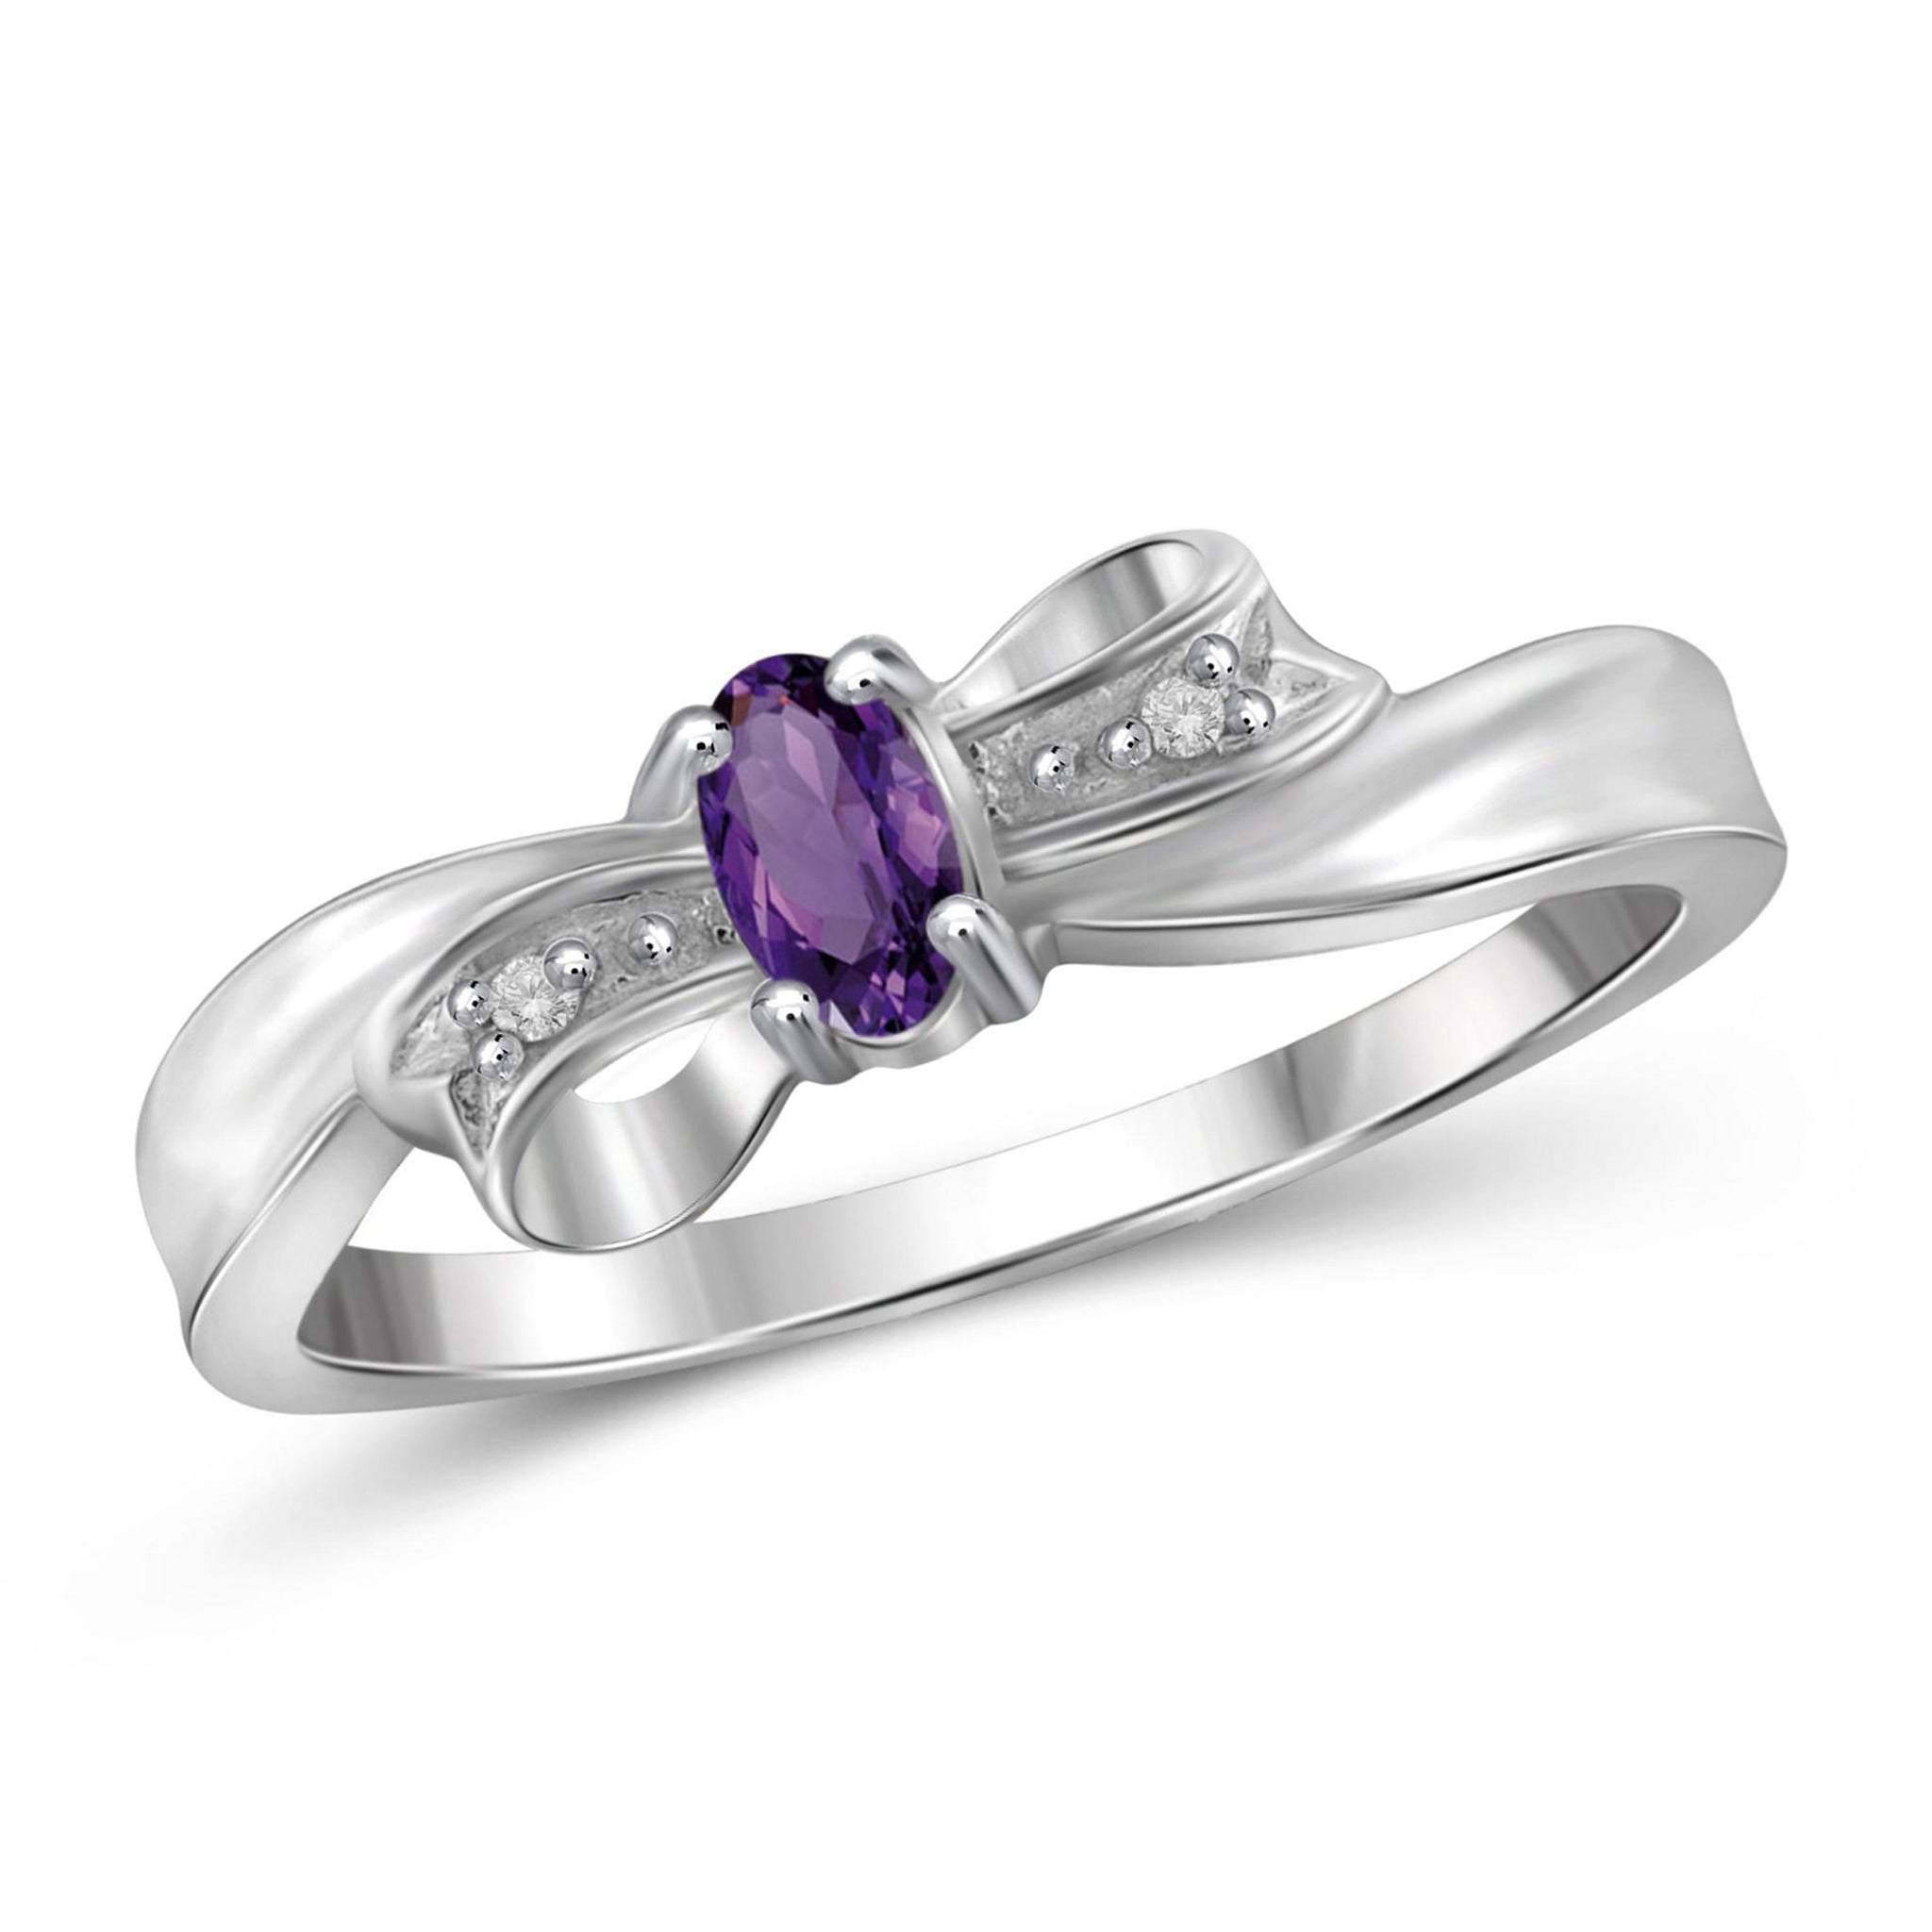 JewelonFire 1/4 Carat T.G.W. Amethyst And White Diamond Accent Sterling Silver Ring - Assorted Colors